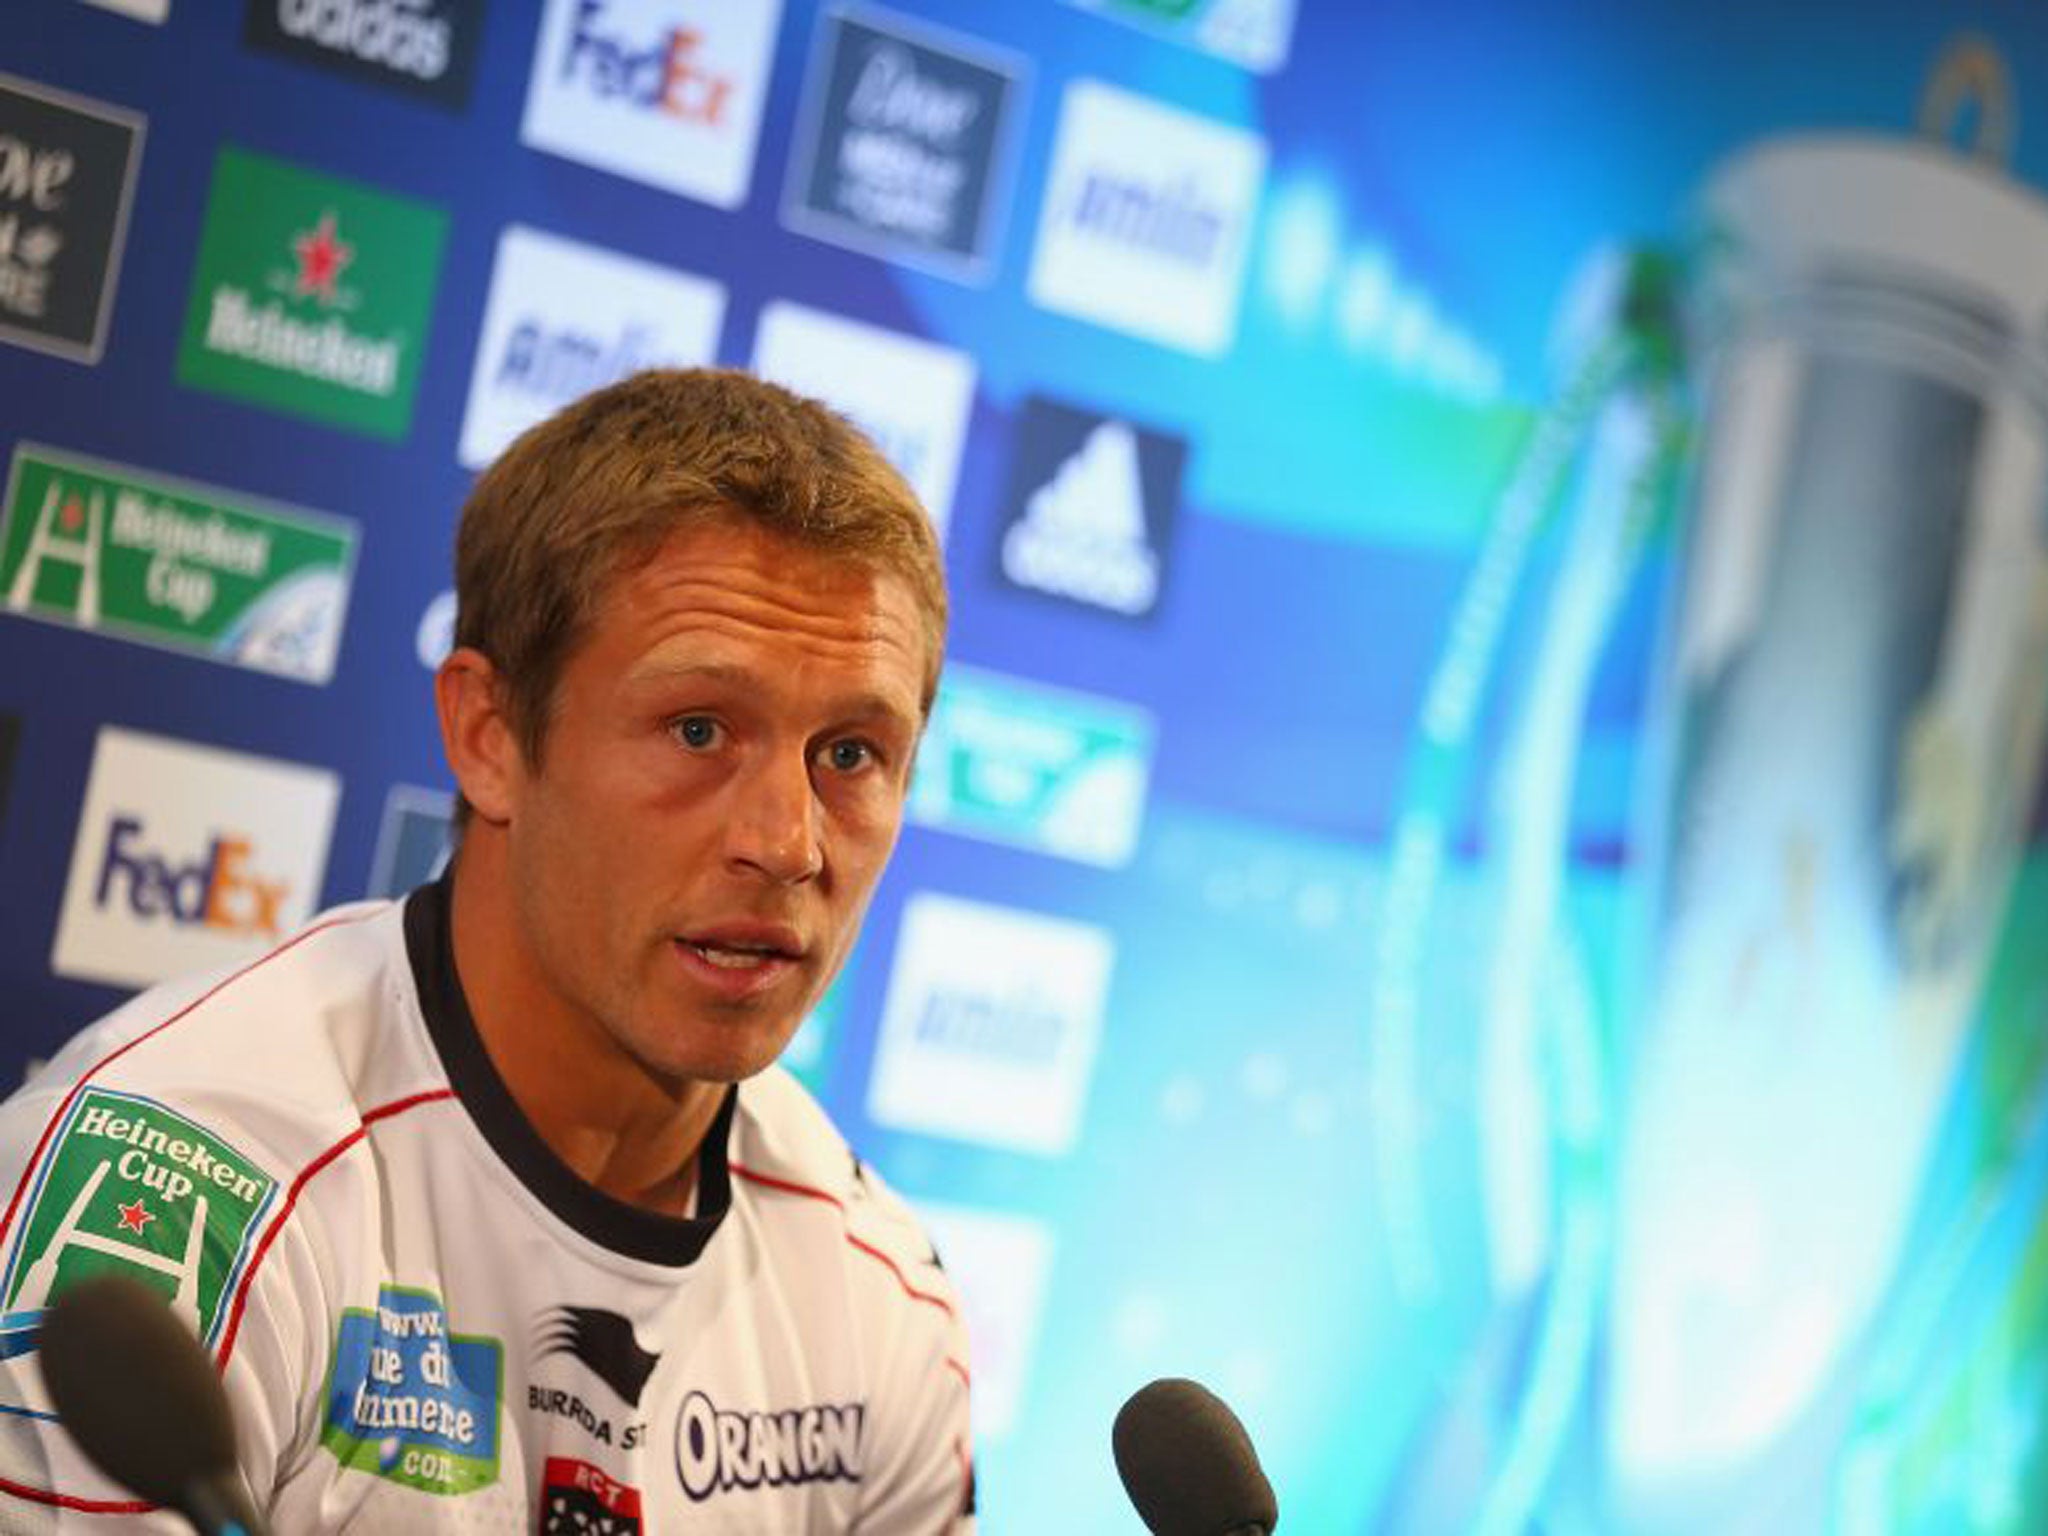 Jonny Wilkinson plays his 46th game at Twickenham tomorrow against Saracens, 43 of them for England